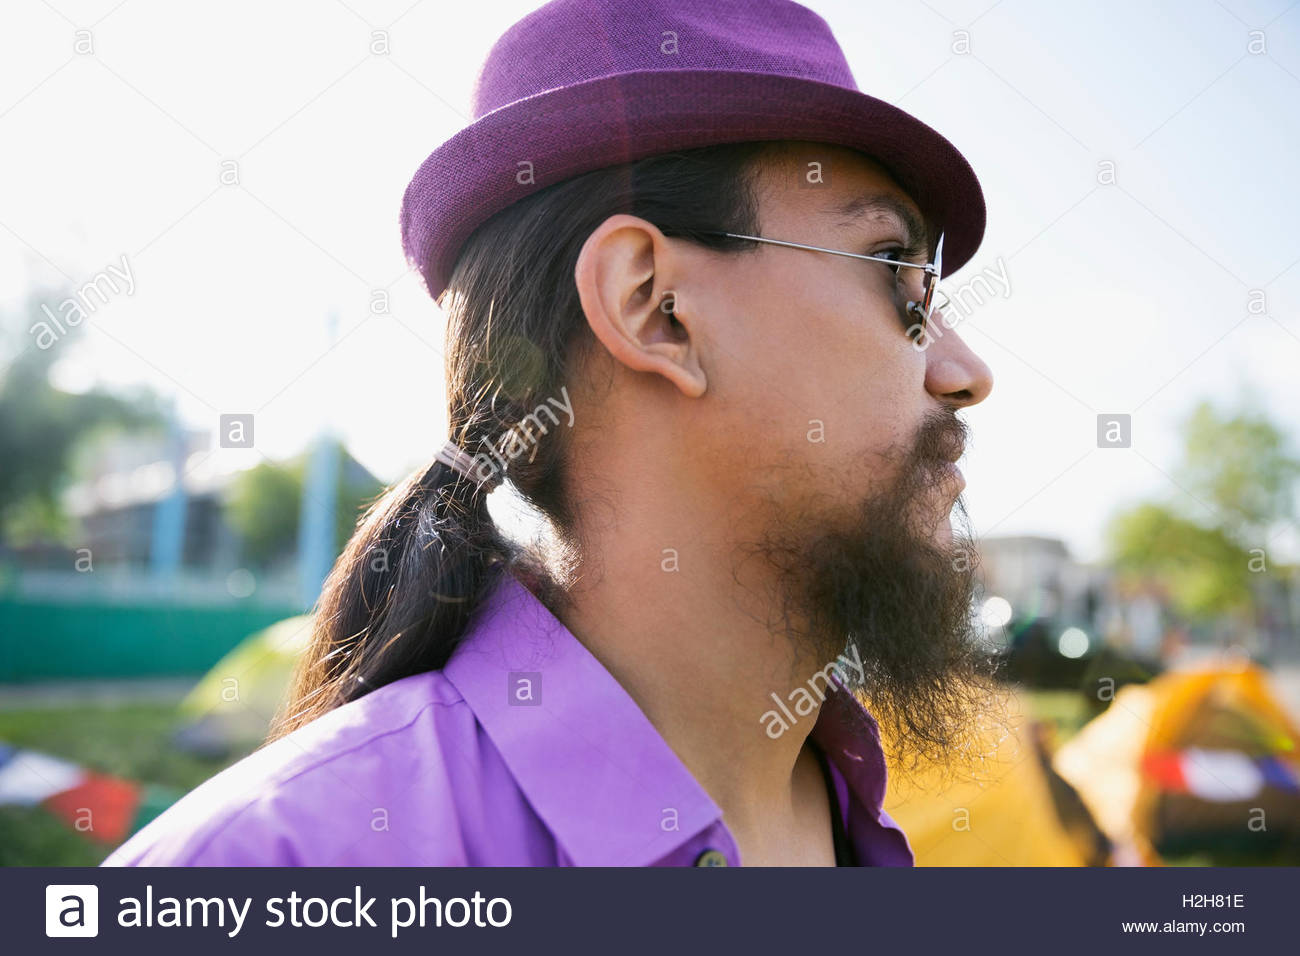 Close up portrait pensive young man with ponytail and beard wearing purple hat looking away Stock Photo